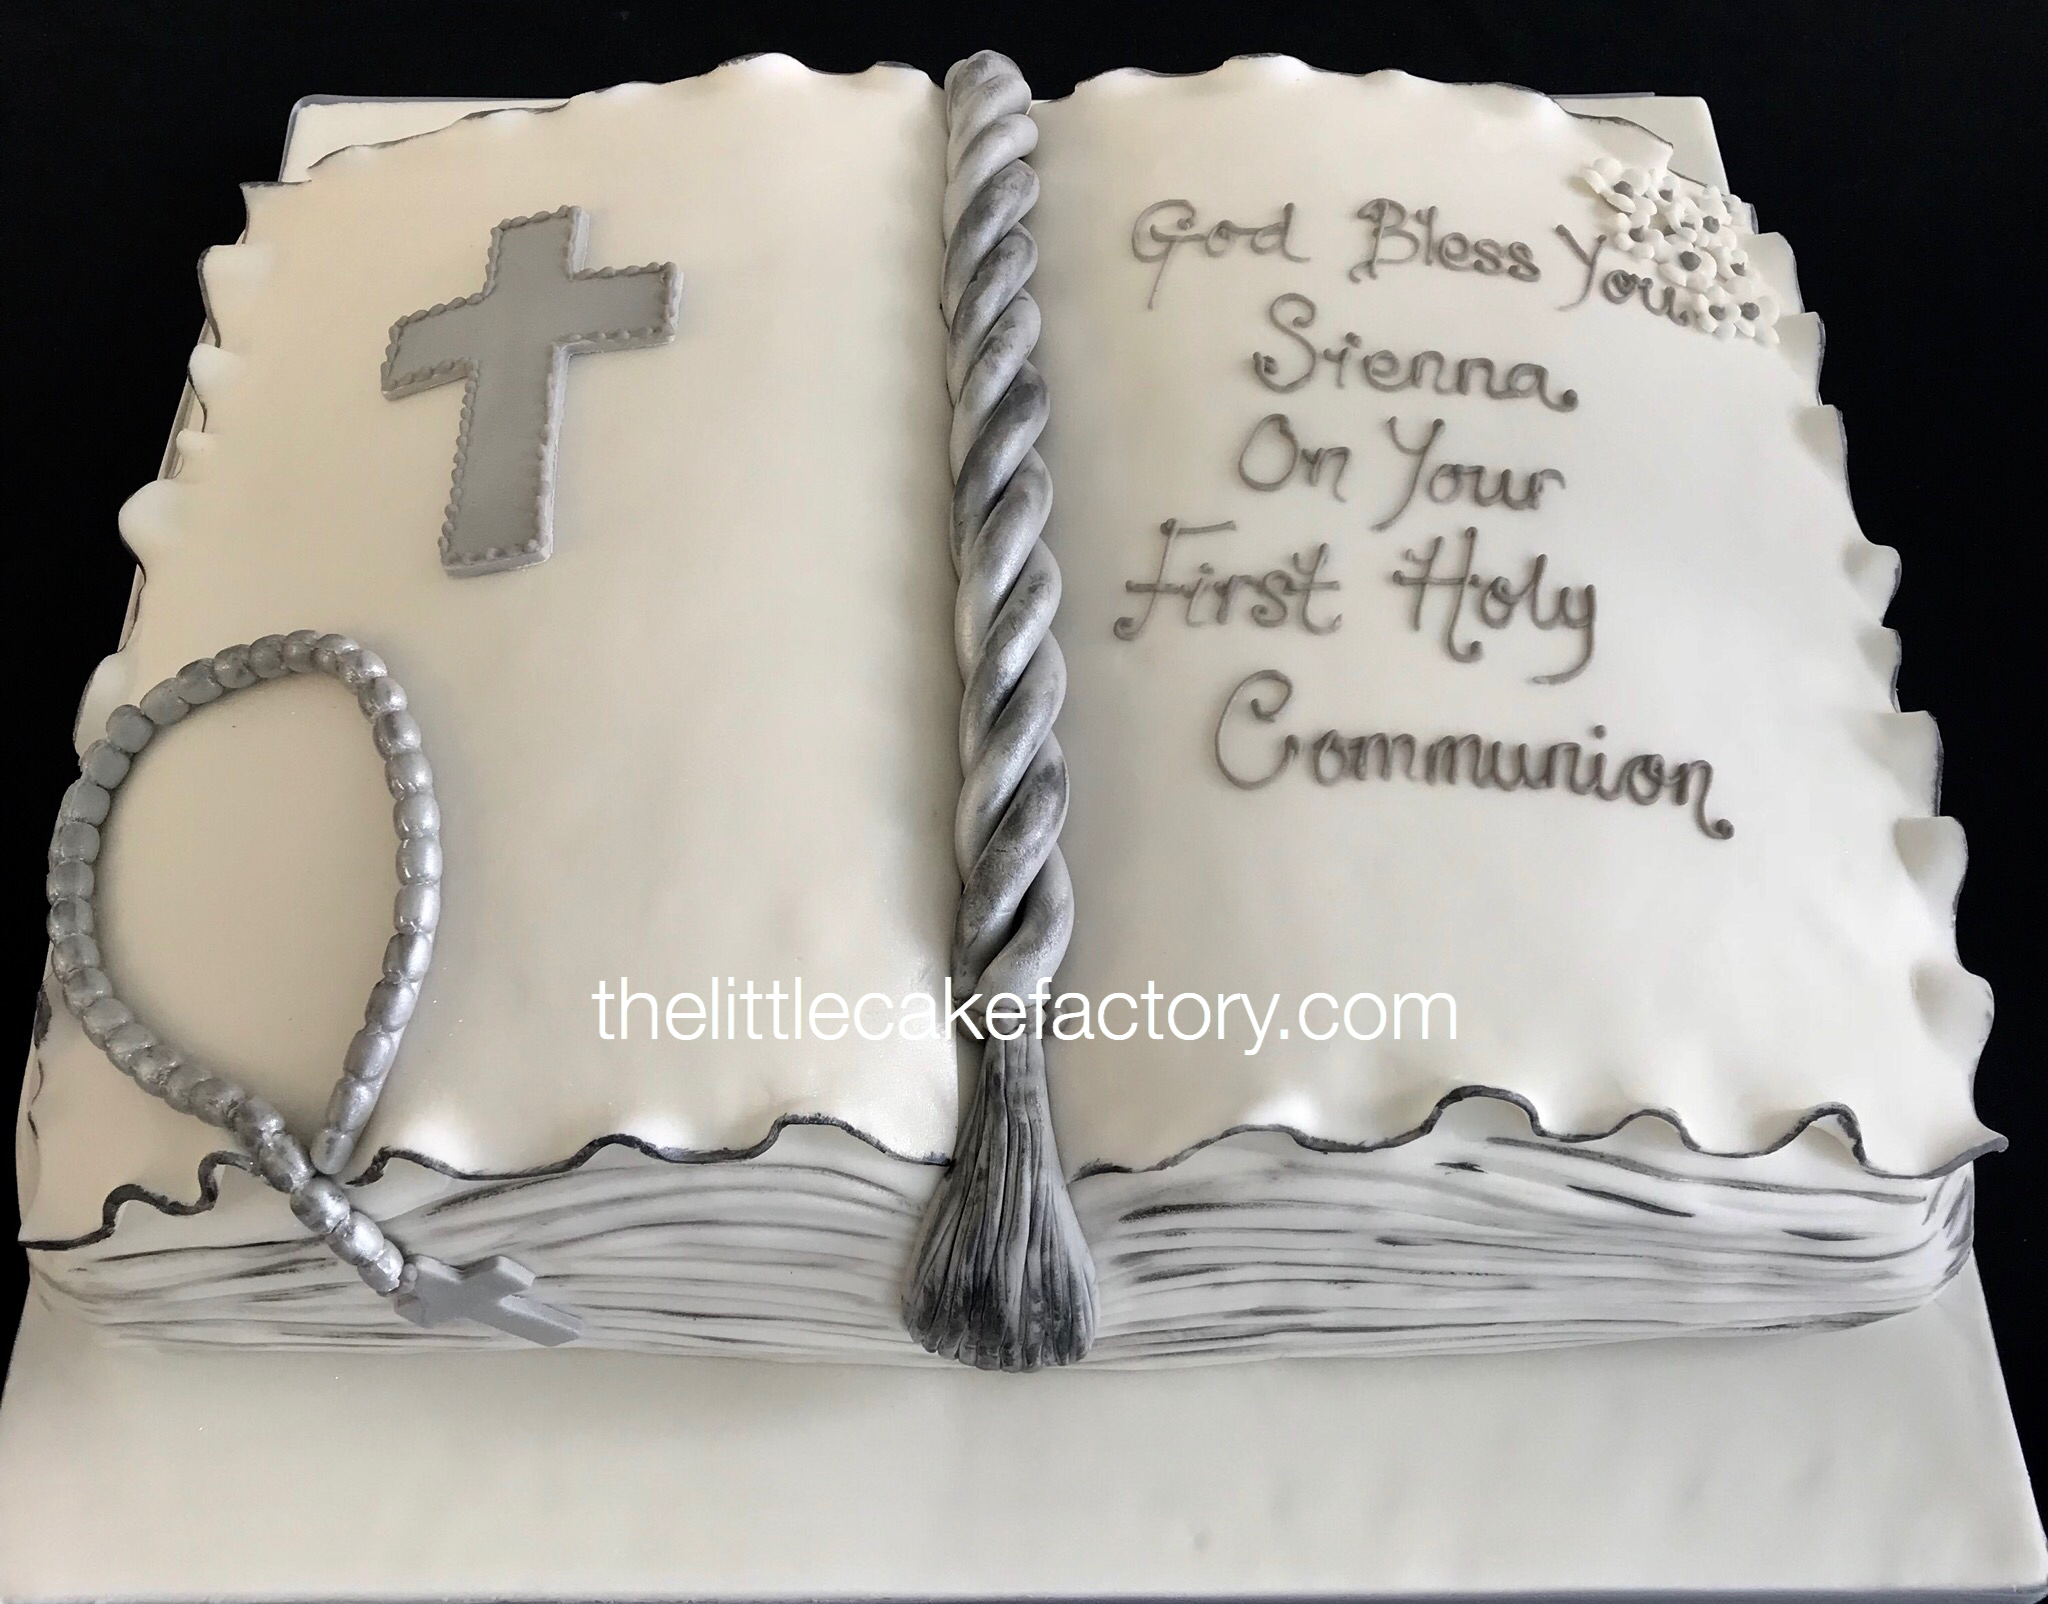 first holy communion bible Cake | Religious Cakes